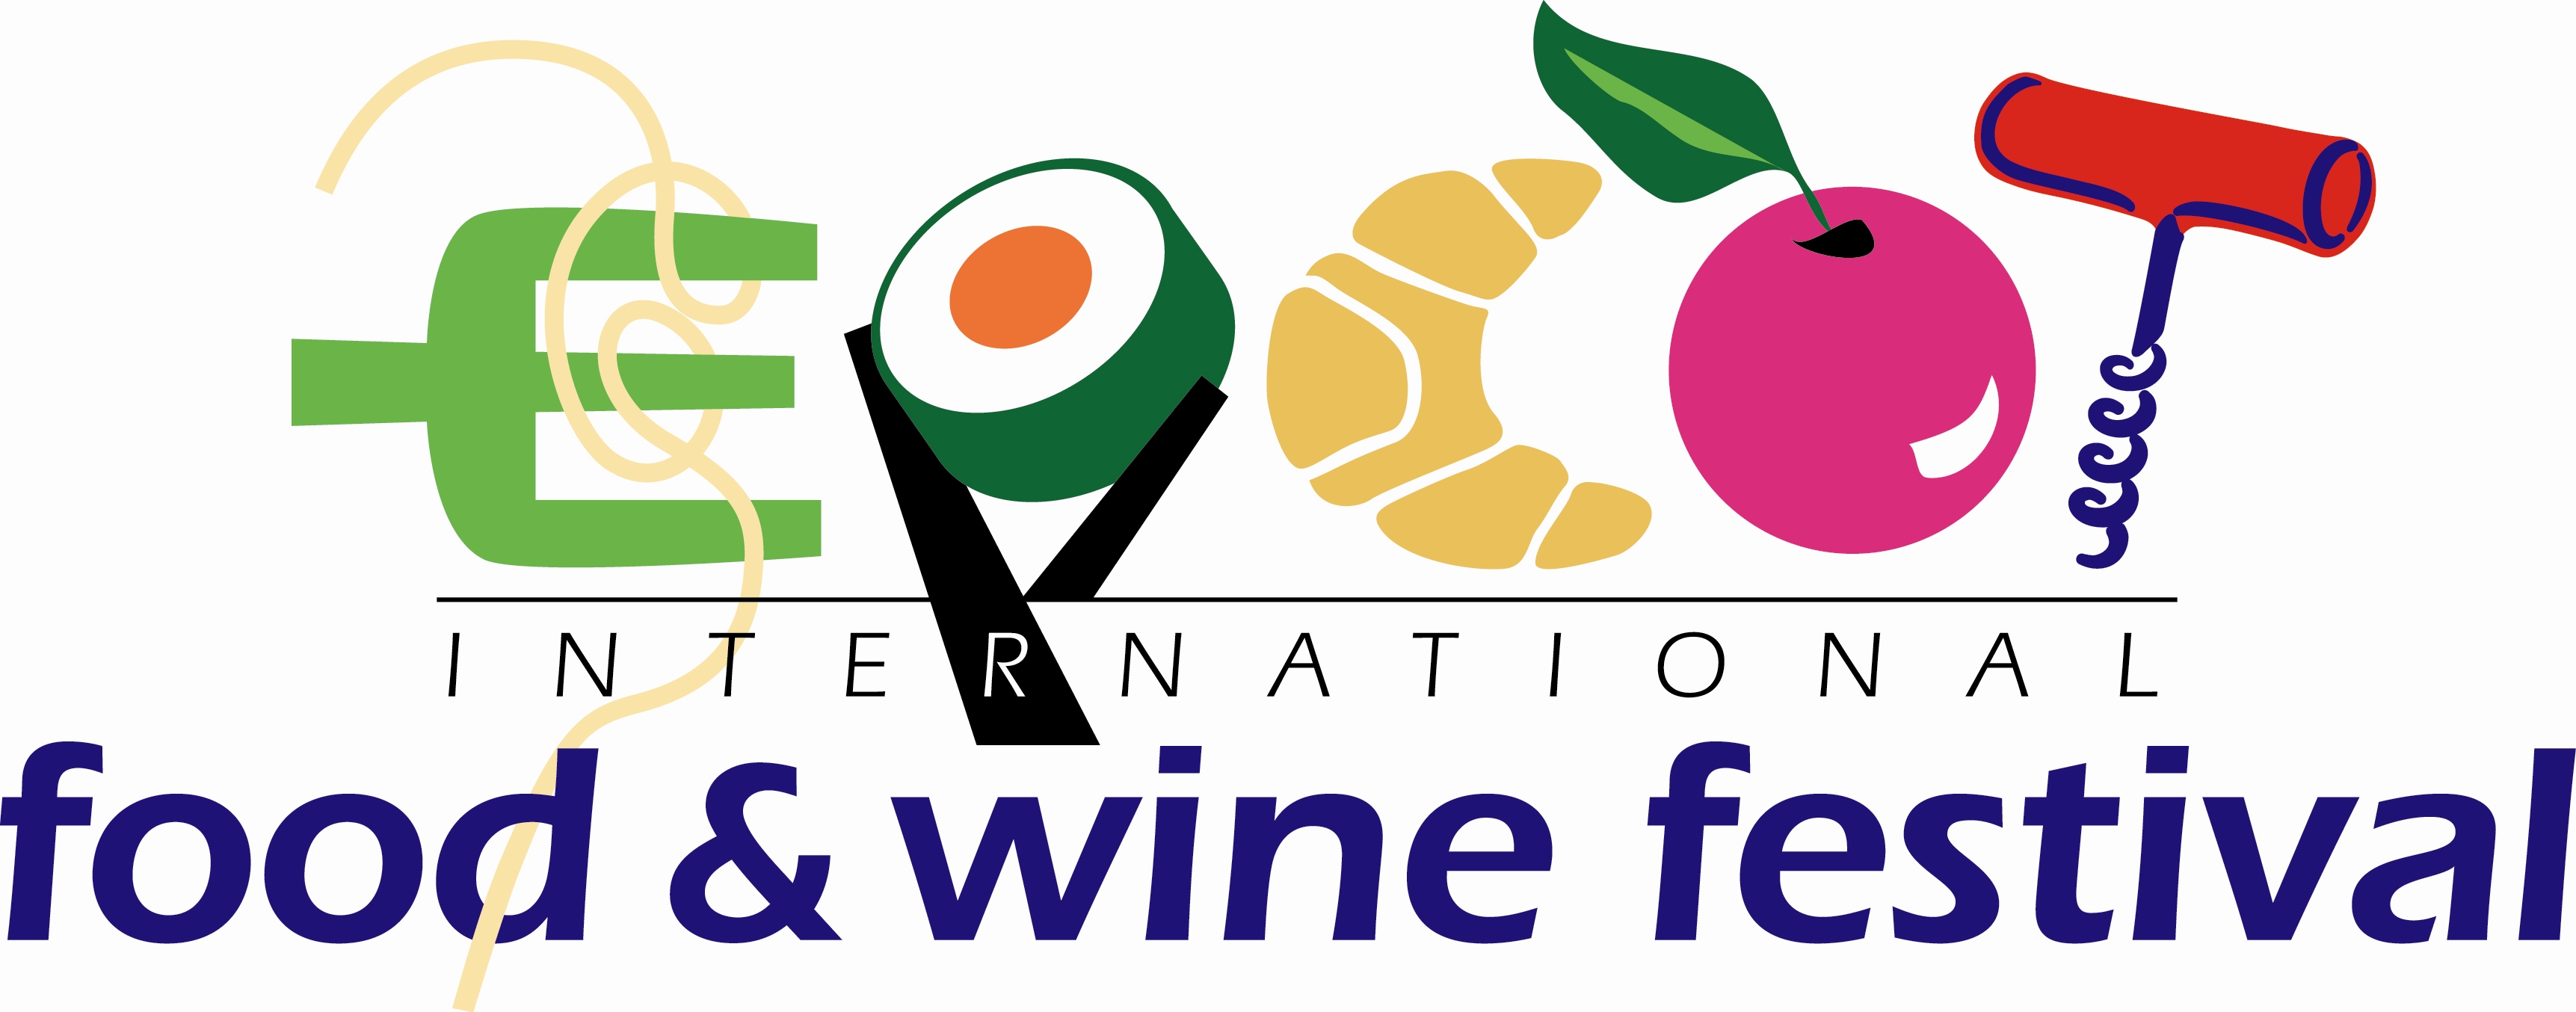 Disney news: Epcot Food and Wine Festival dates have been announced